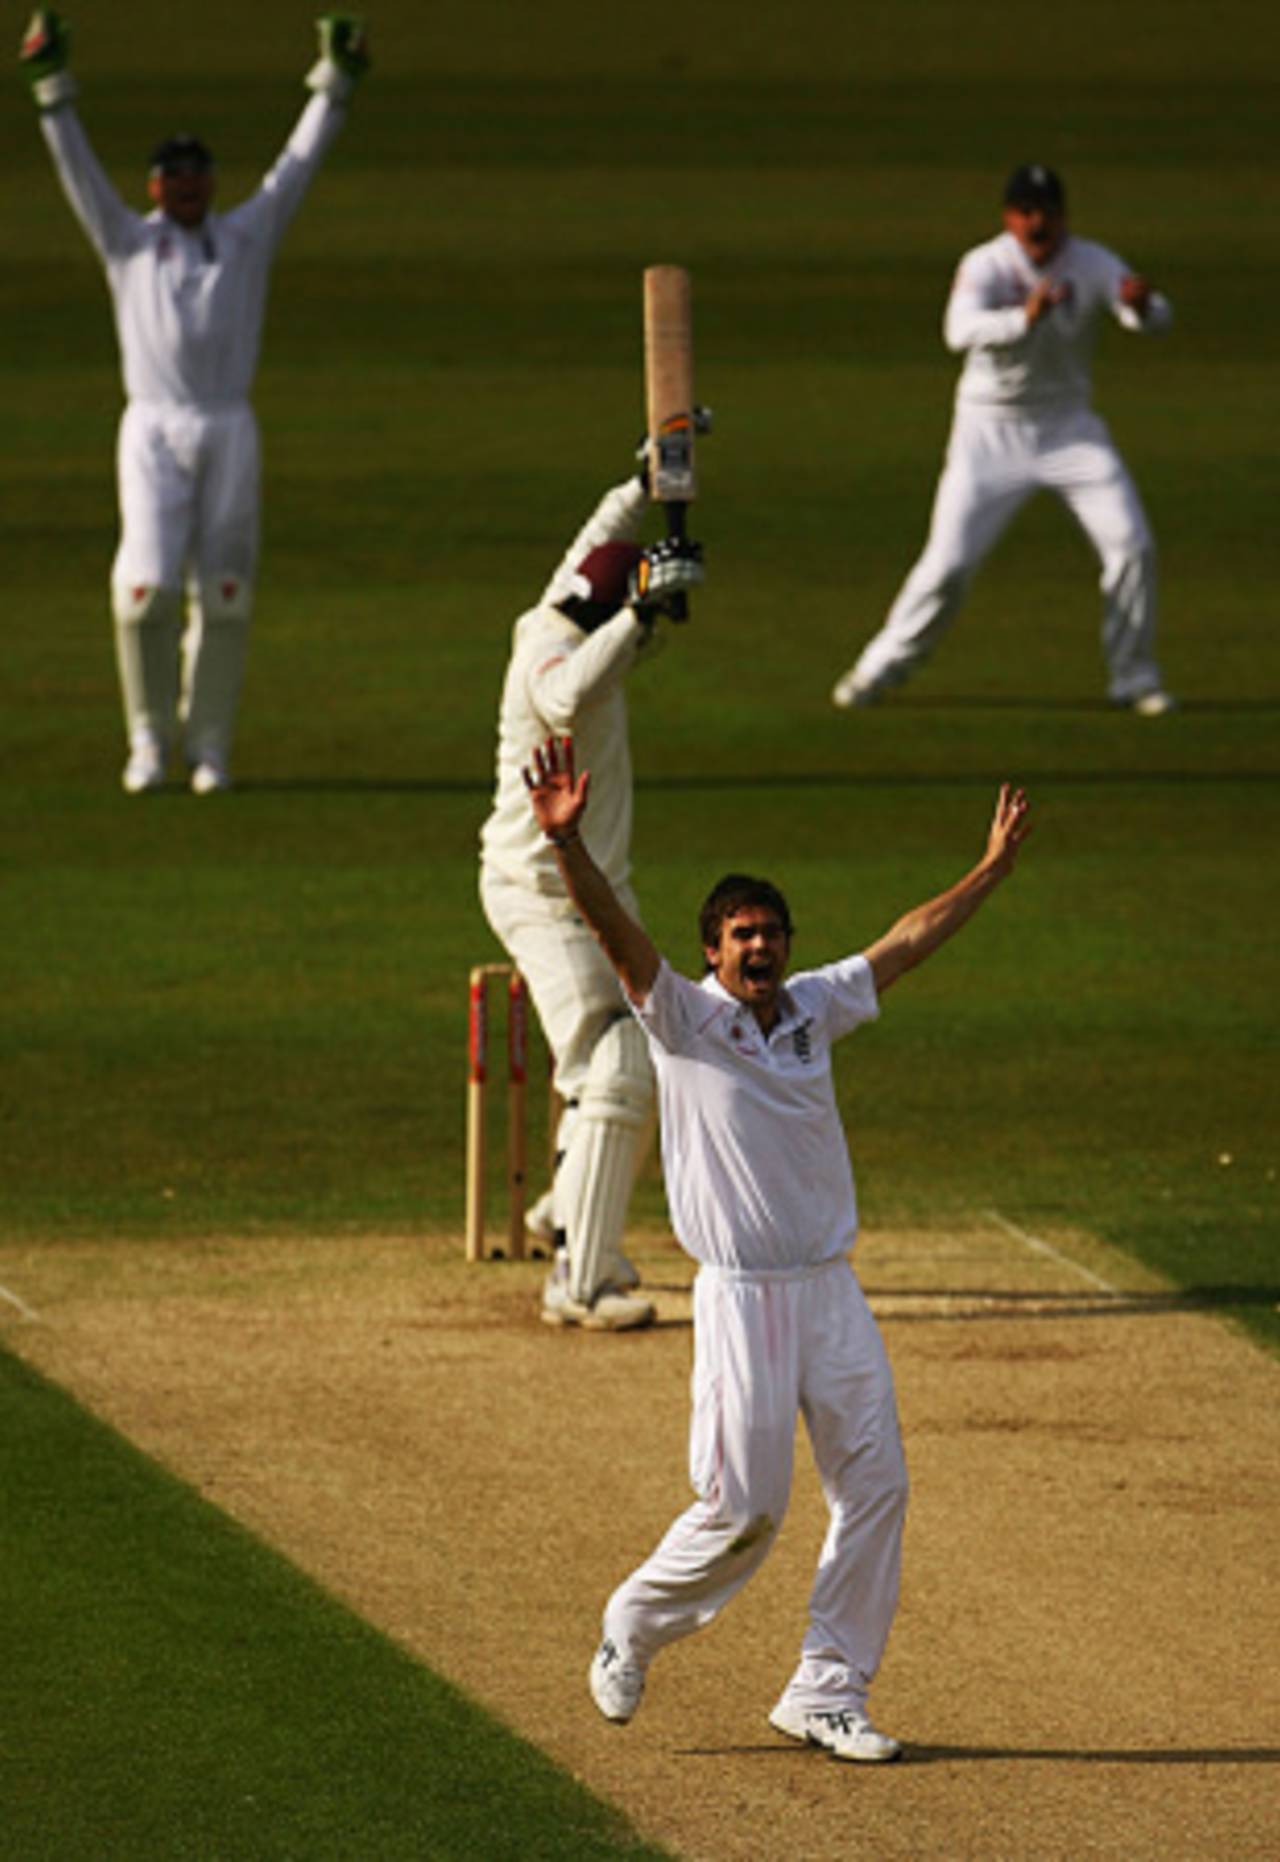 James Anderson appeals successfully for the wicket of Chris Gayle, England v West Indies, 2nd Test, Chester-le-Street, May 16, 2009